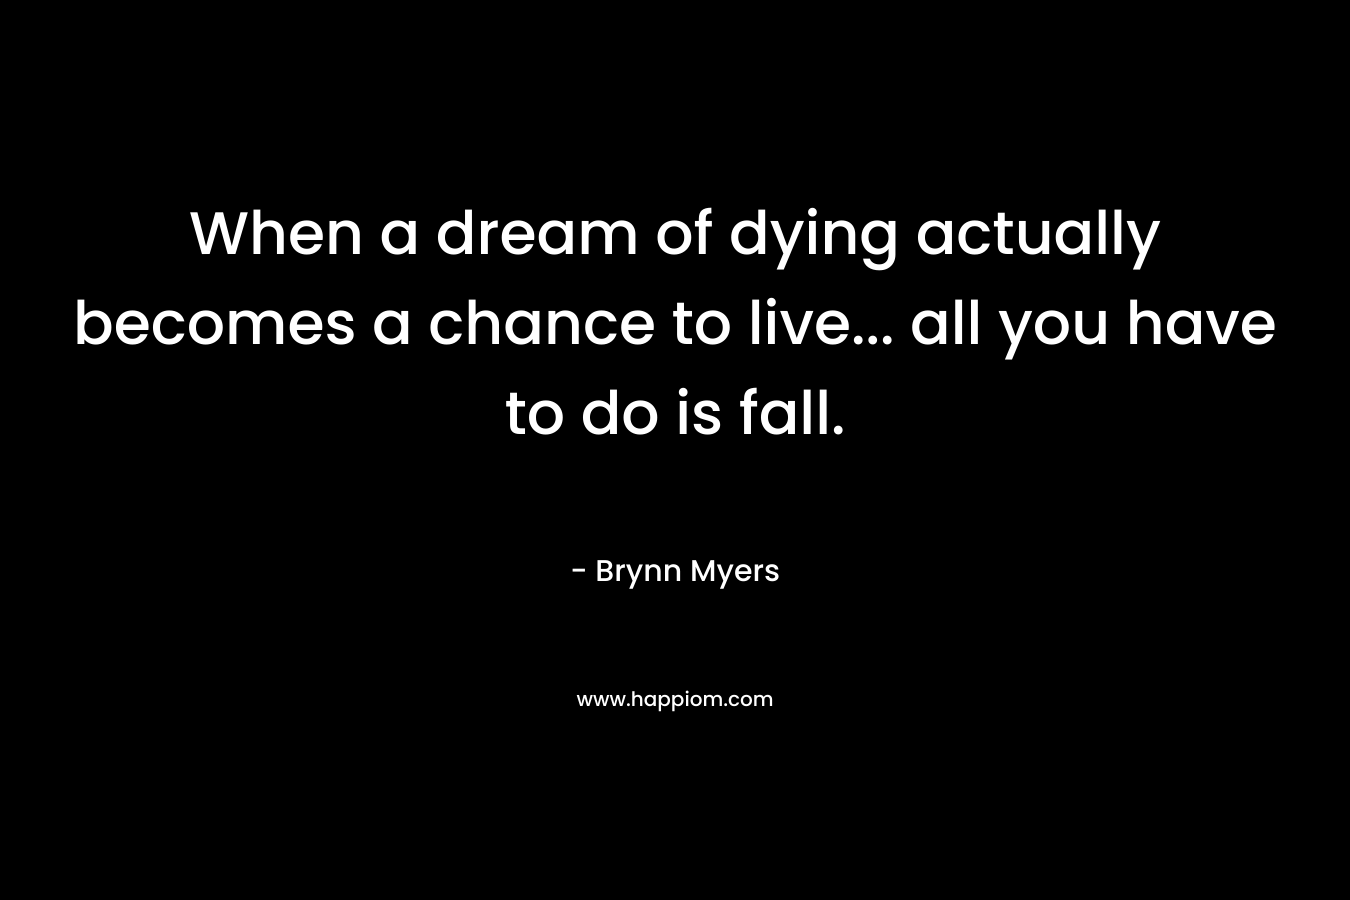 When a dream of dying actually becomes a chance to live... all you have to do is fall.